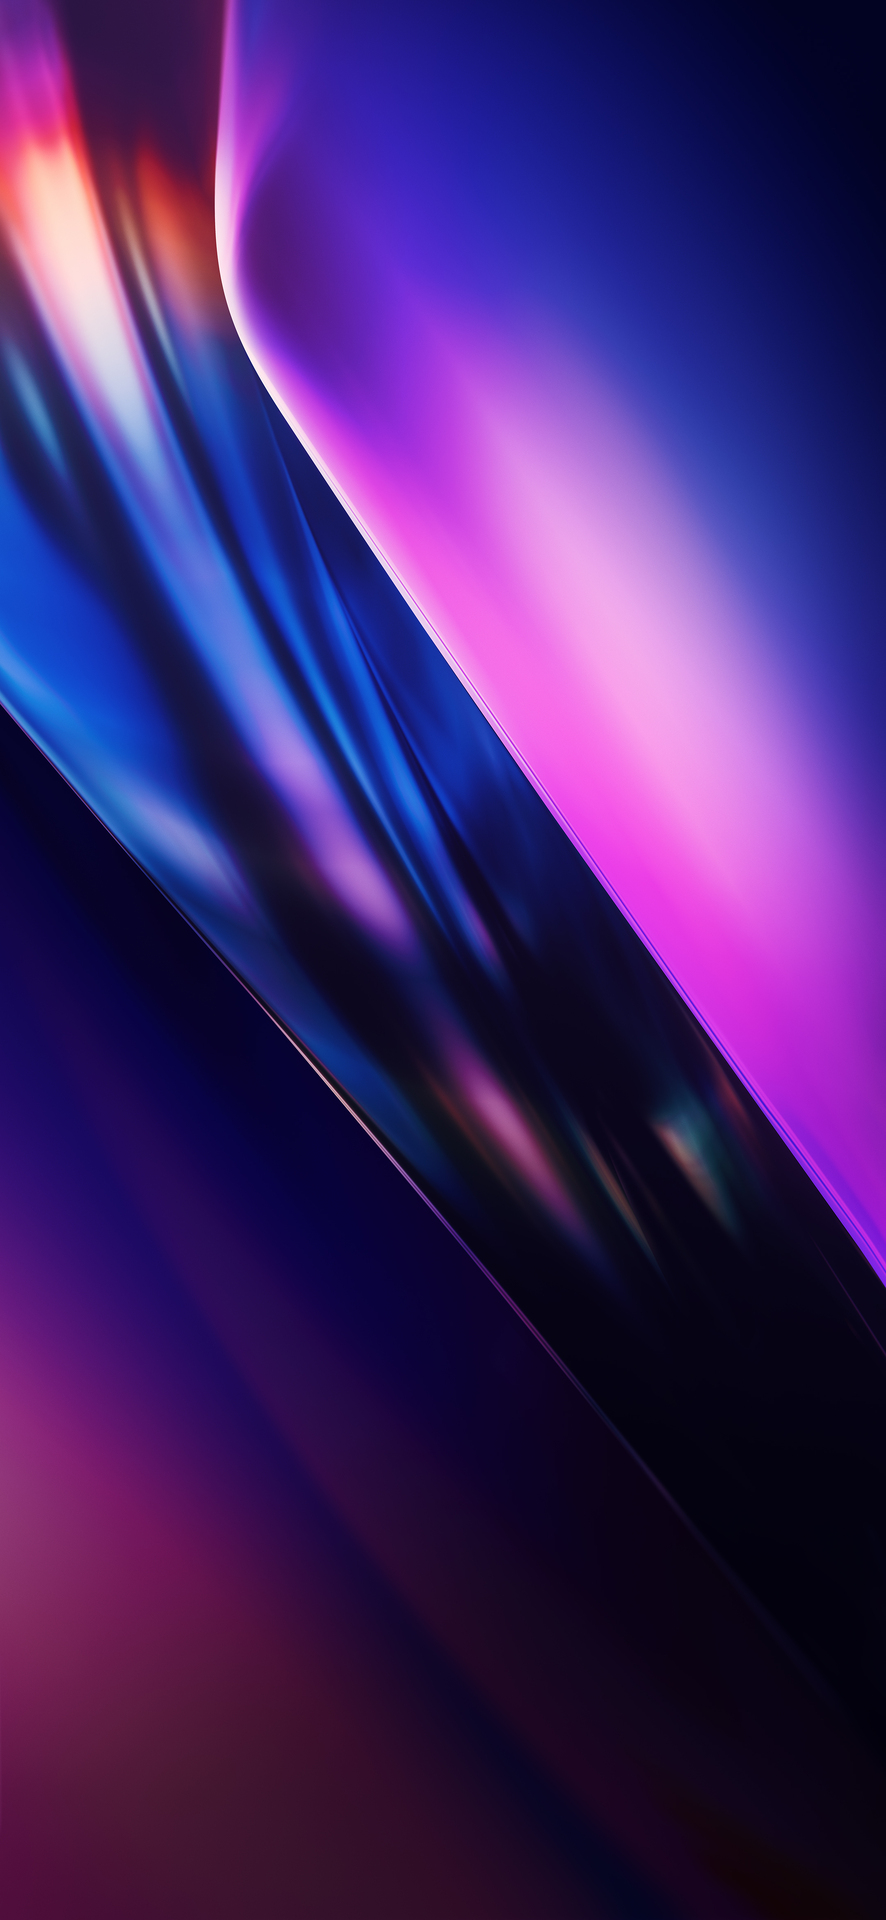 OnePlus 7T wallpapers are here, live wallpapers too! - Android Authority